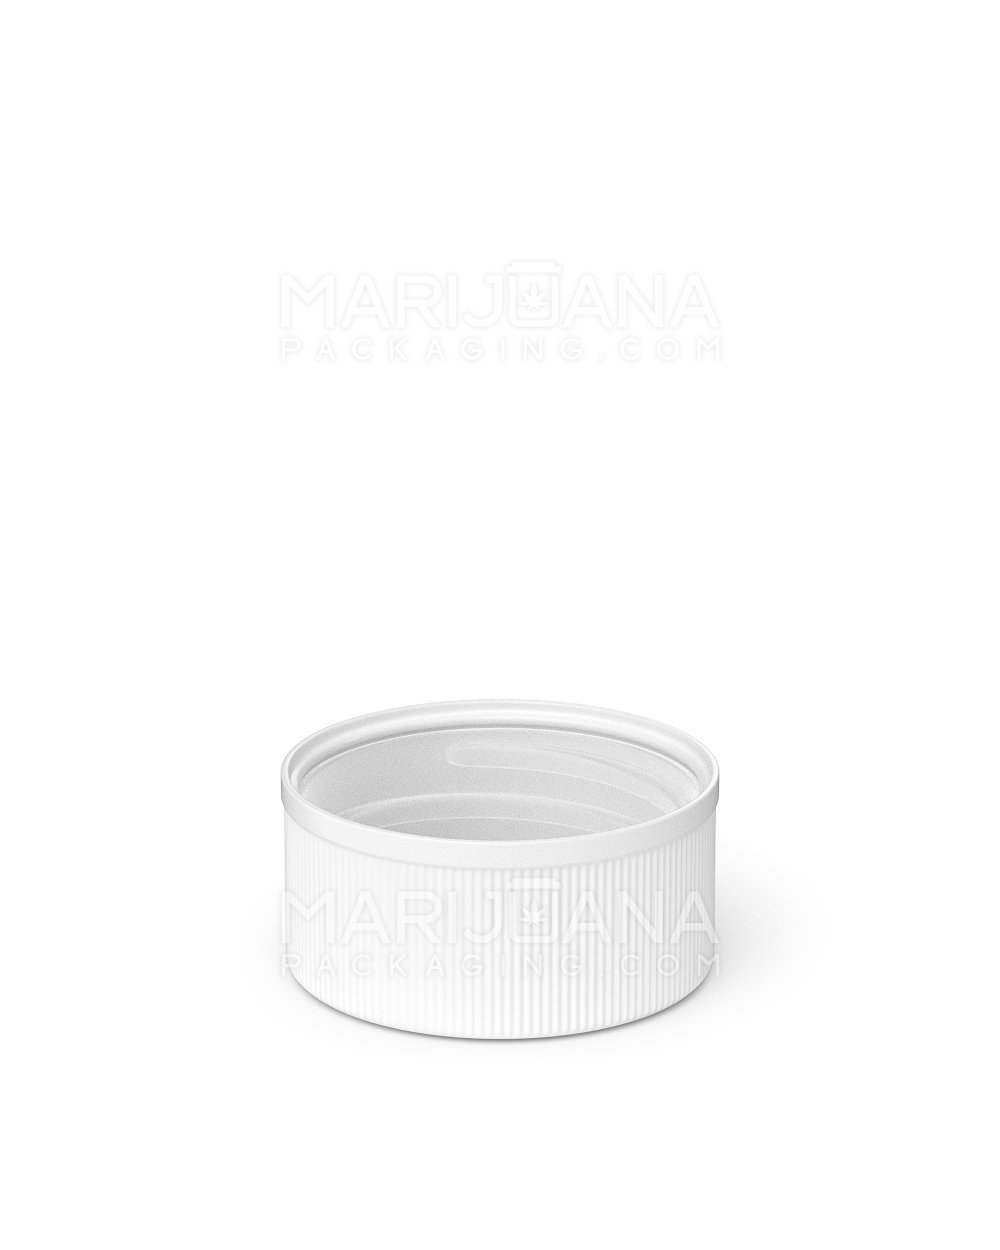 Child Resistant | Ribbed Push Down & Turn Plastic Caps w/ Text & Foam Liner | 28mm - Semi Gloss White - 504 Count - 4